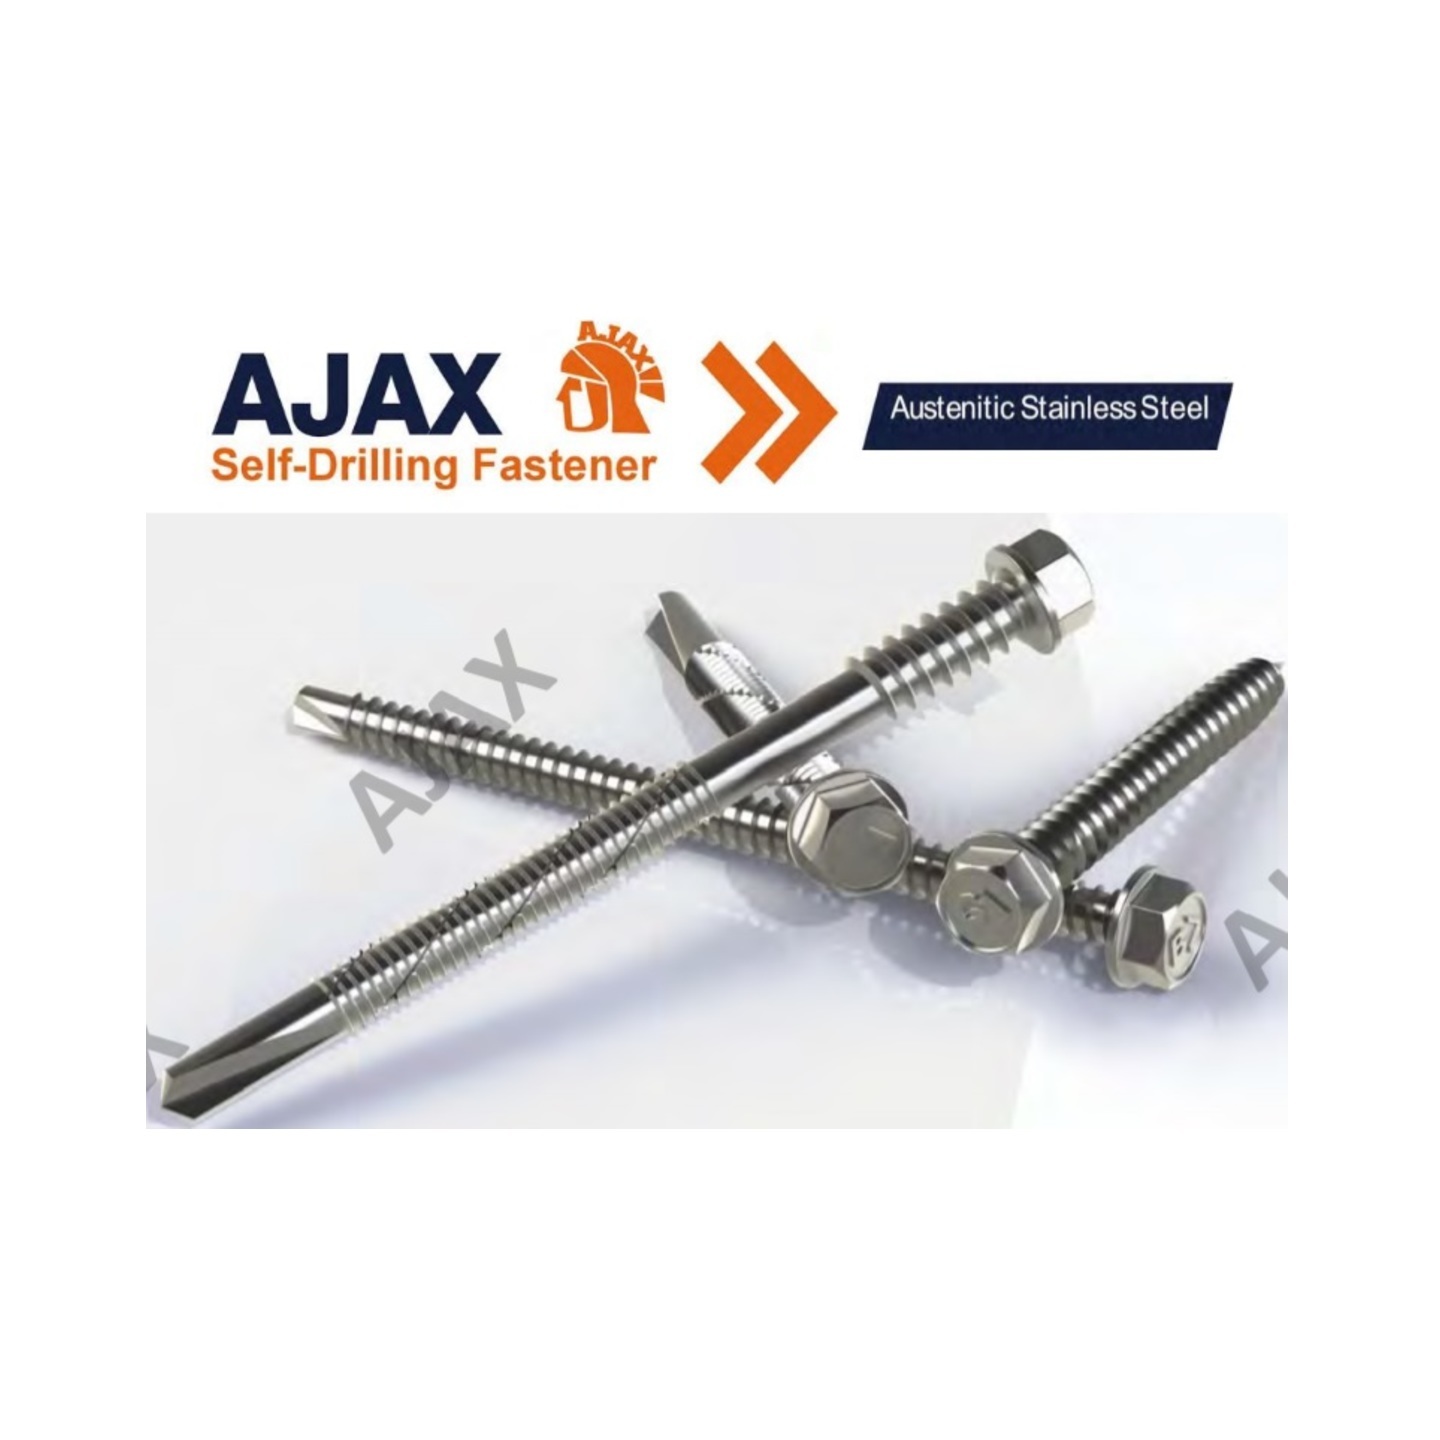 Ajax Bi-Metal Self-Drilling Screw Austenitic Stainless Steel 316 / 304 Series with a unique comformal coating technology